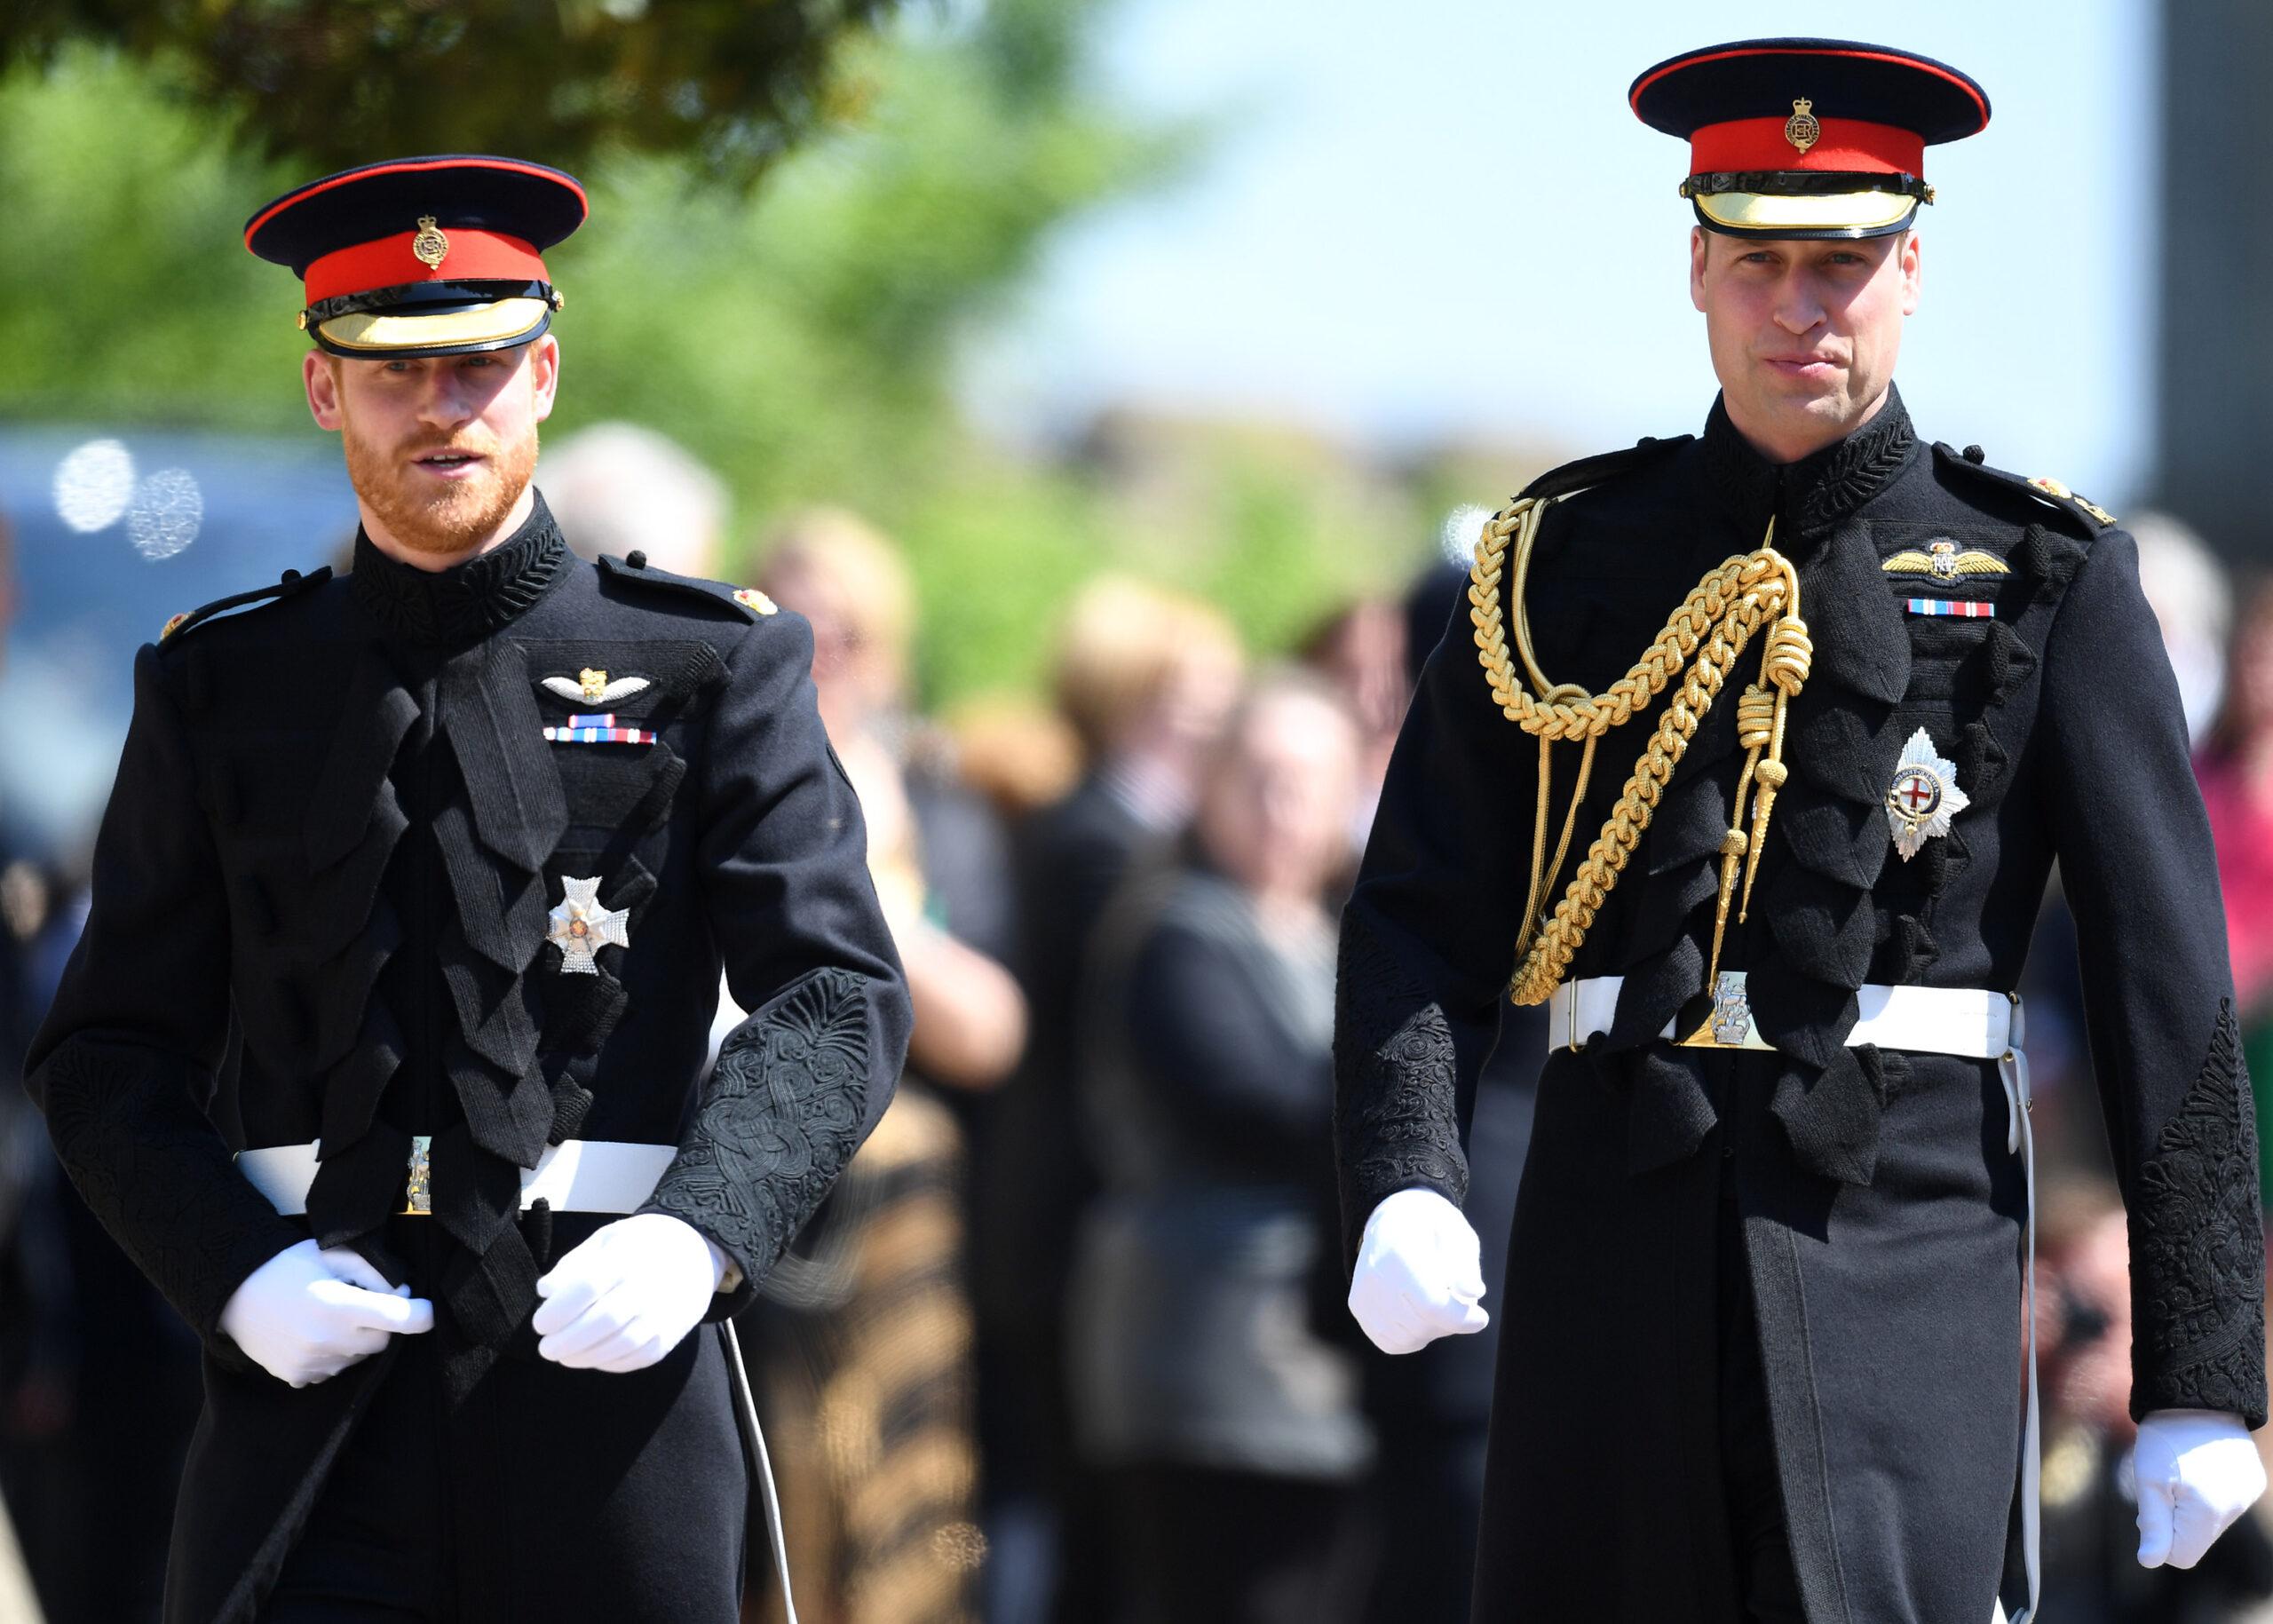 Prince Harry and Prince William seen arriving at Windsor Castle for Harry's wedding to Meghan Markle